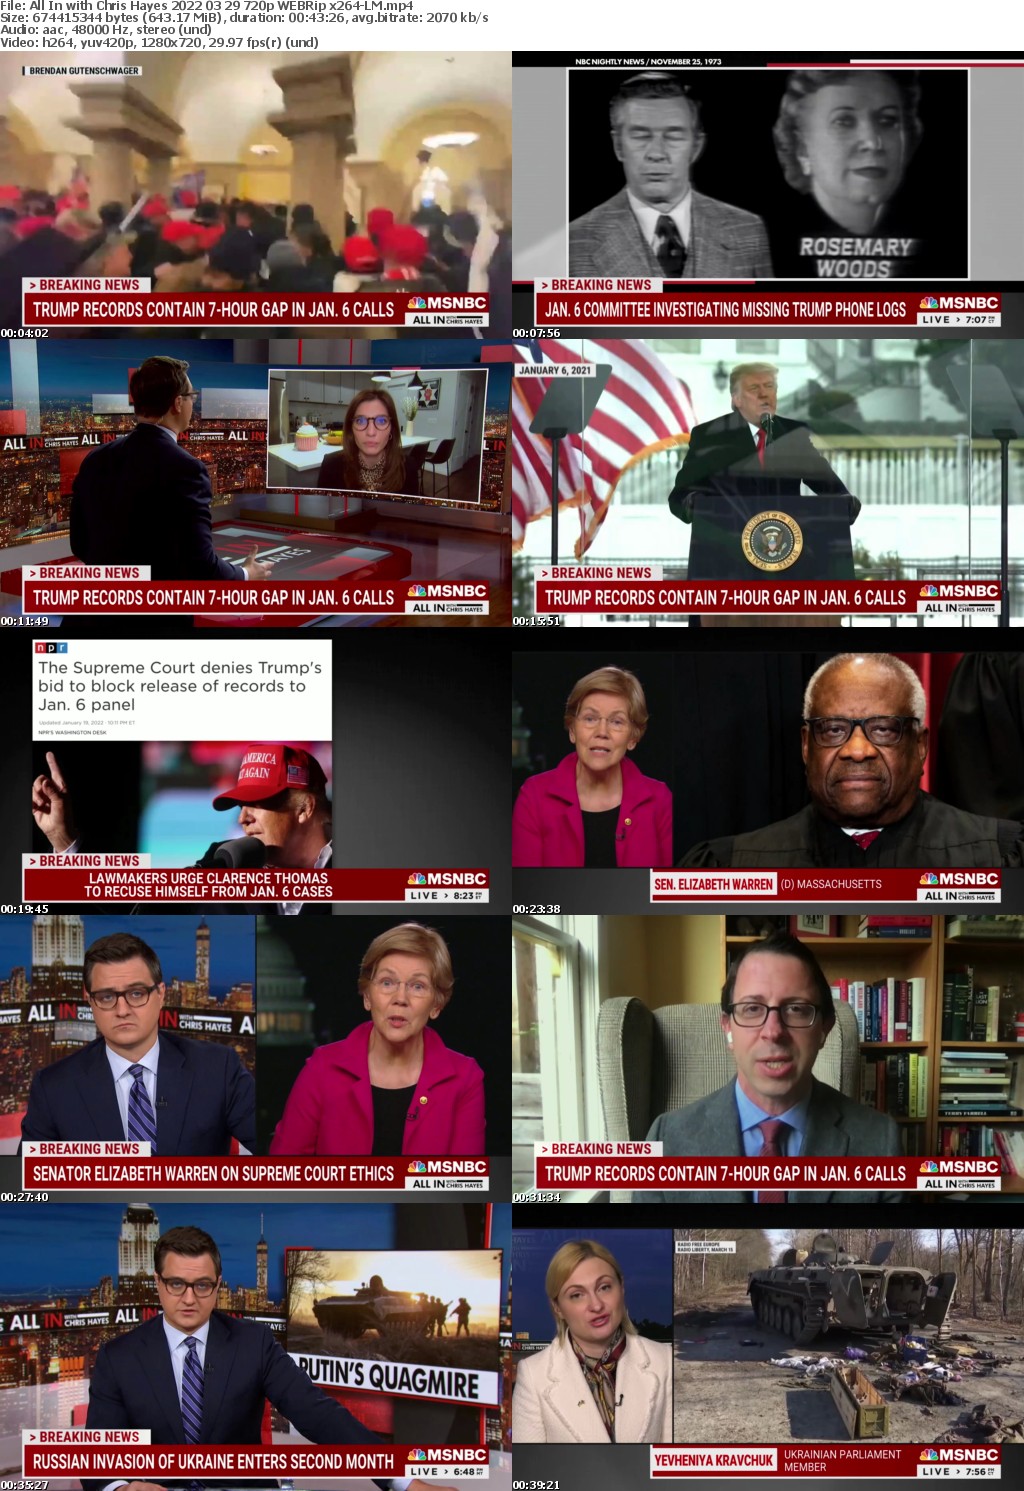 All In with Chris Hayes 2022 03 29 720p WEBRip x264-LM